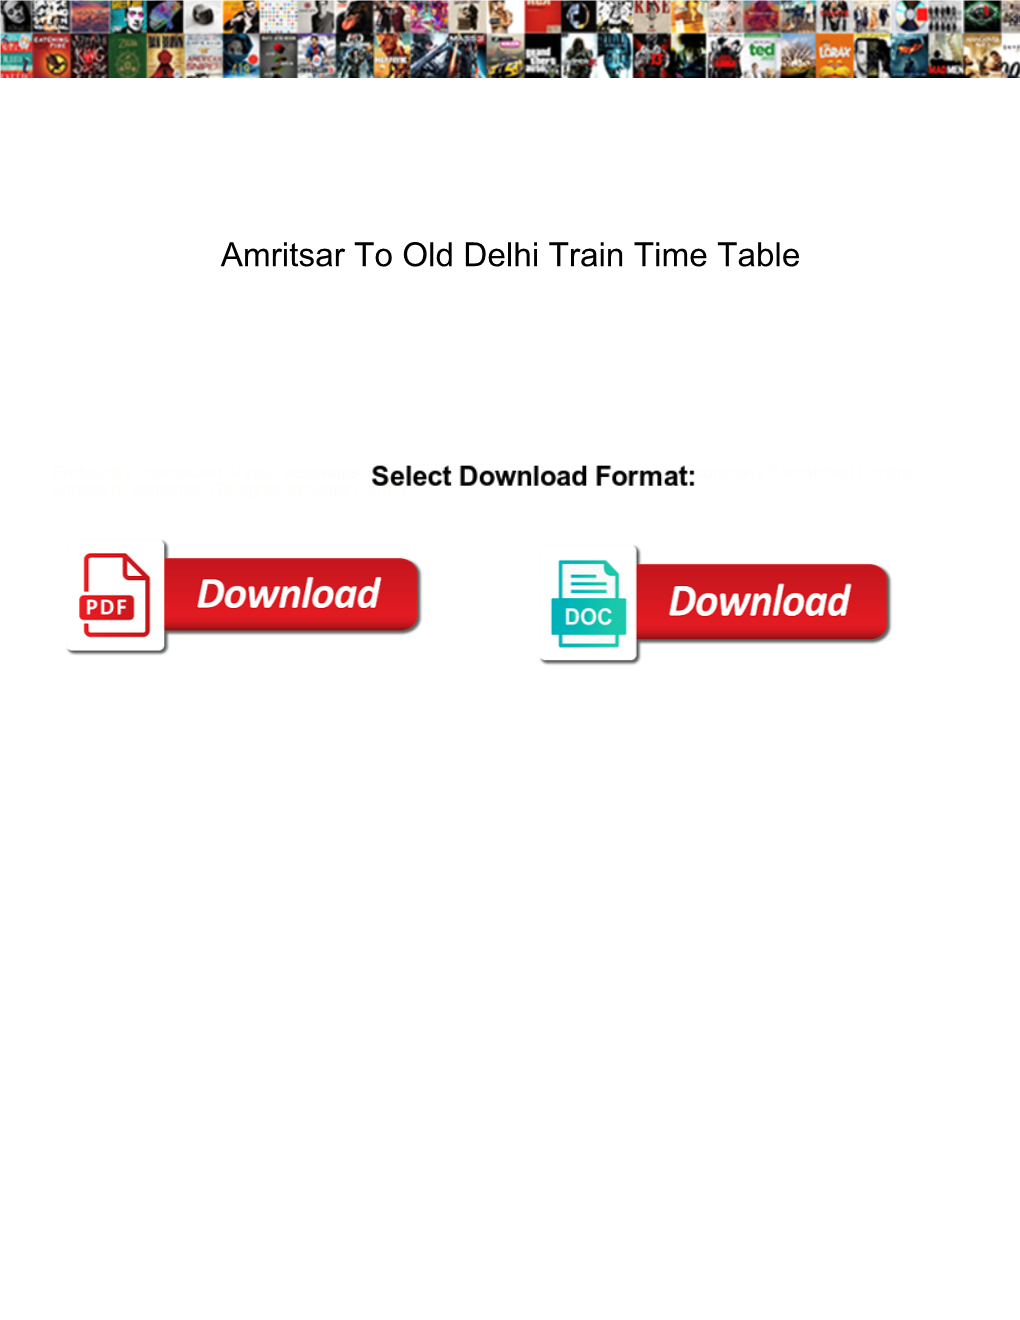 Amritsar to Old Delhi Train Time Table